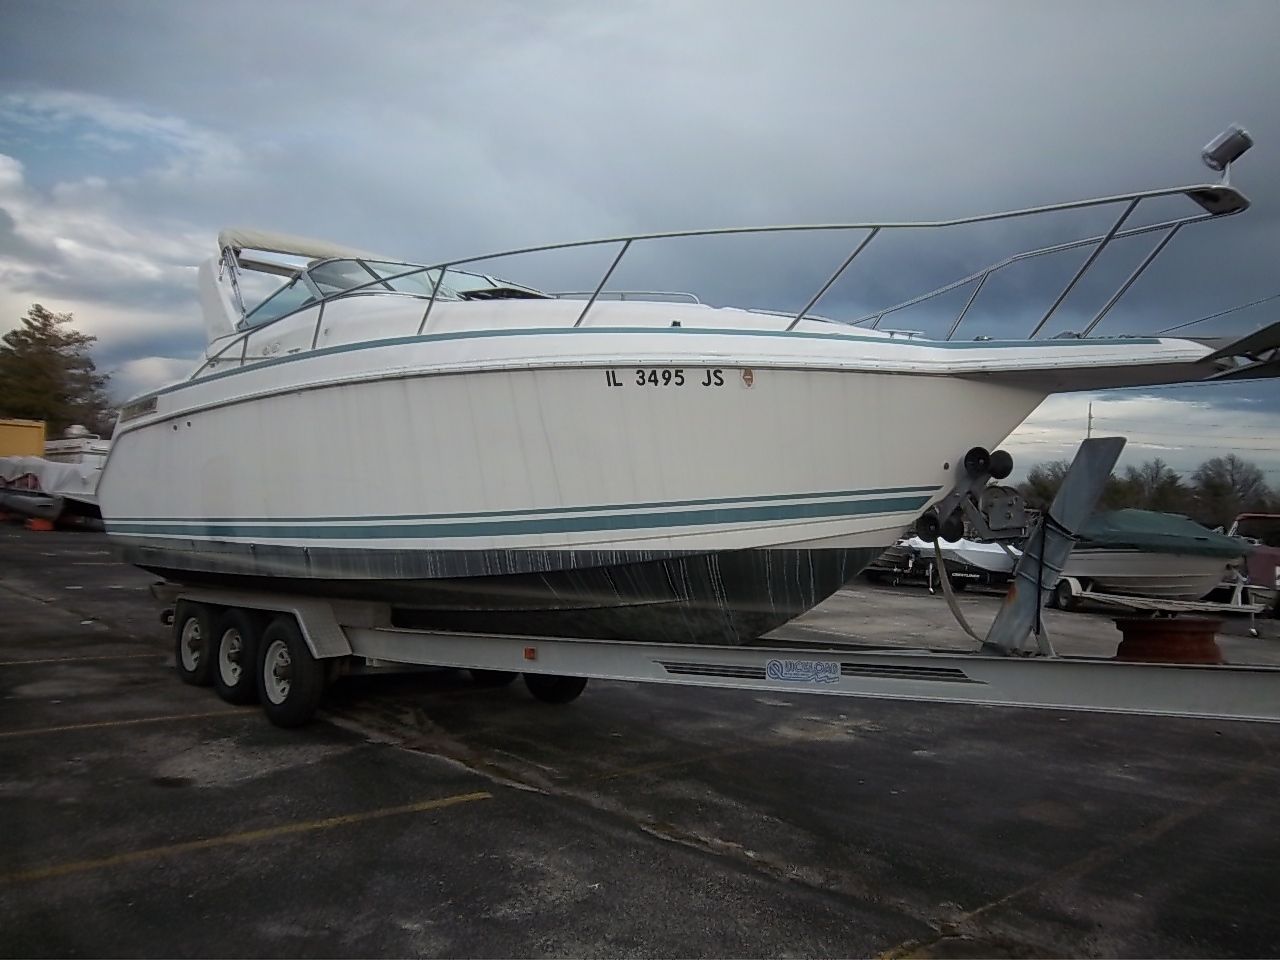 Baja 290 Wide Body Yacht 1993 for sale for $5,800.